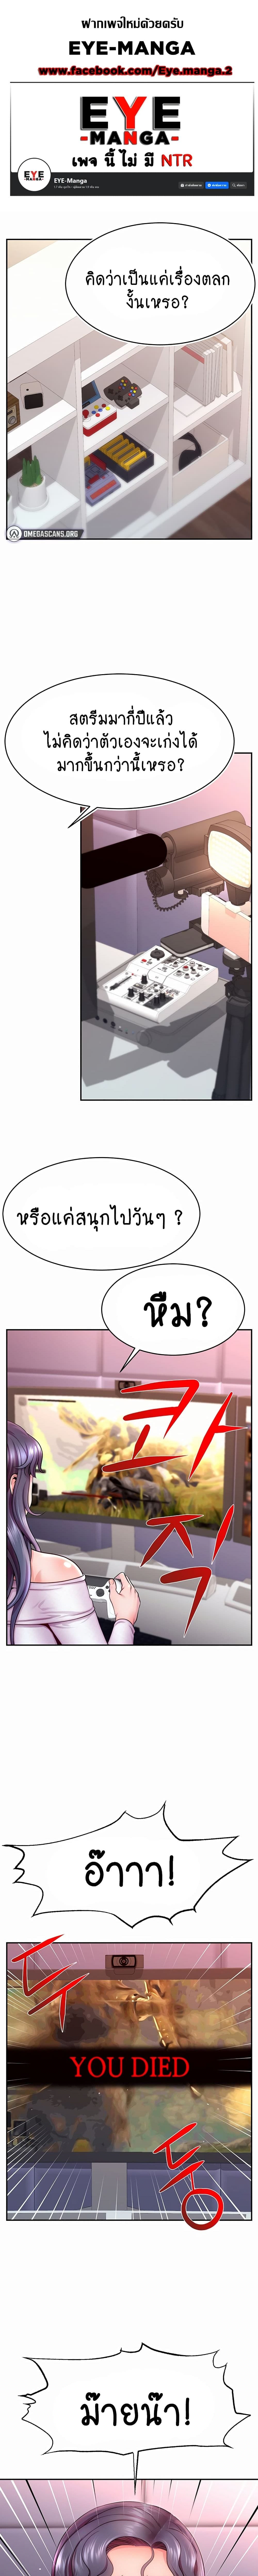 Making Friends With Streamers by Hacking! ตอนที่ 1 ภาพ 0